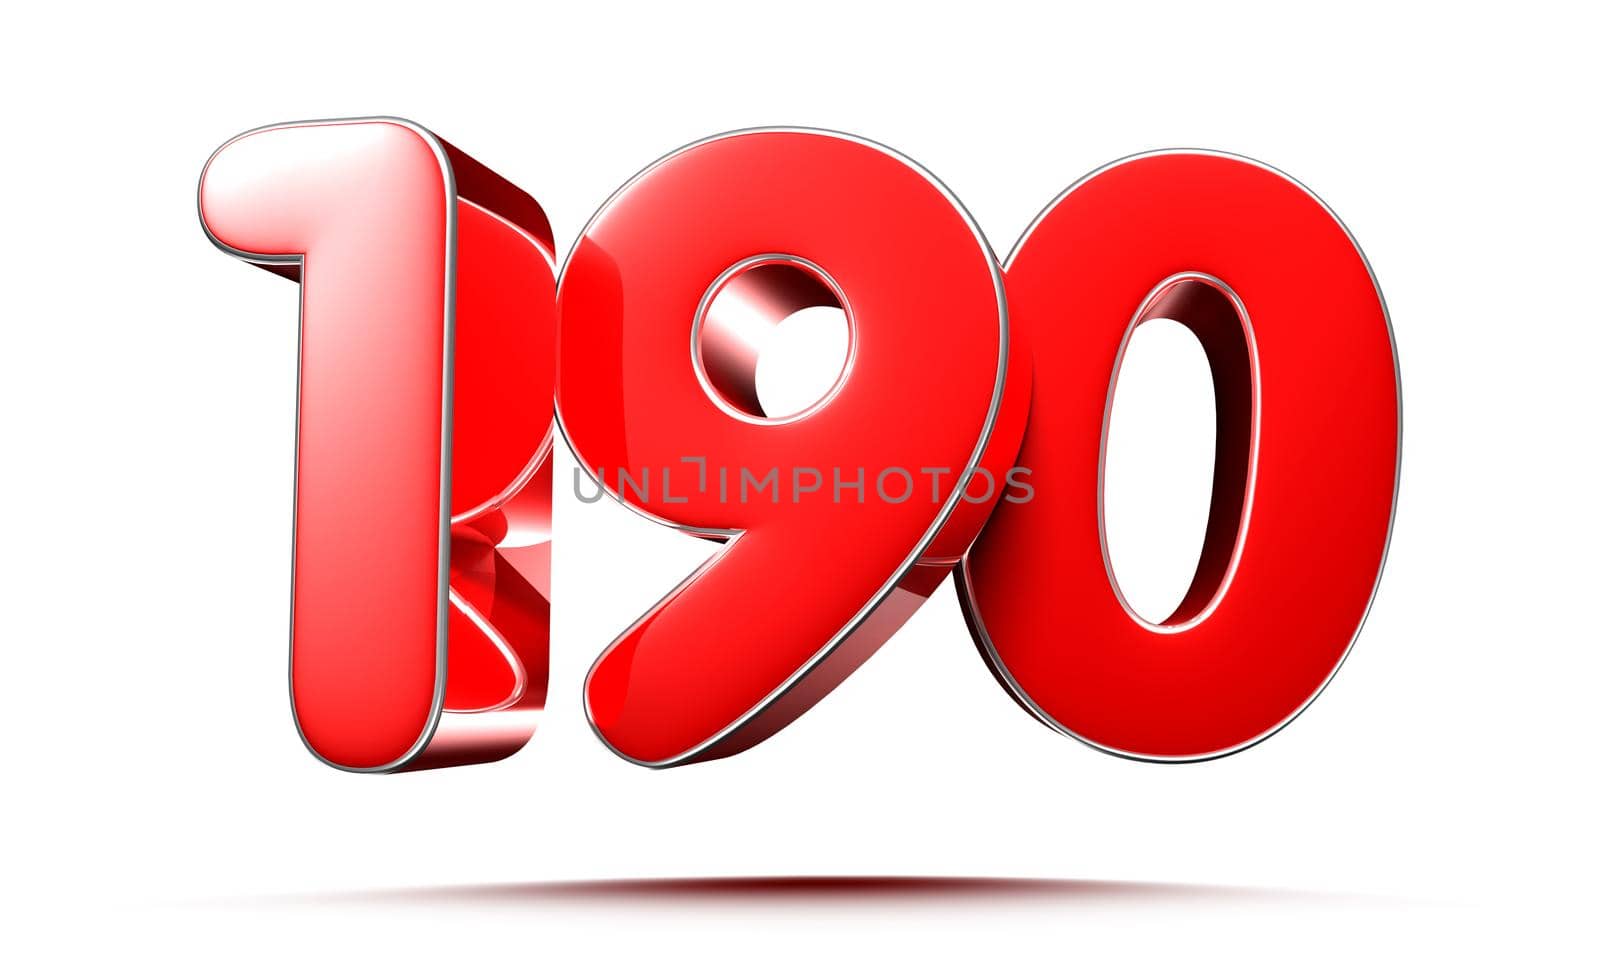 Rounded red numbers 190 on white background 3D illustration with clipping path